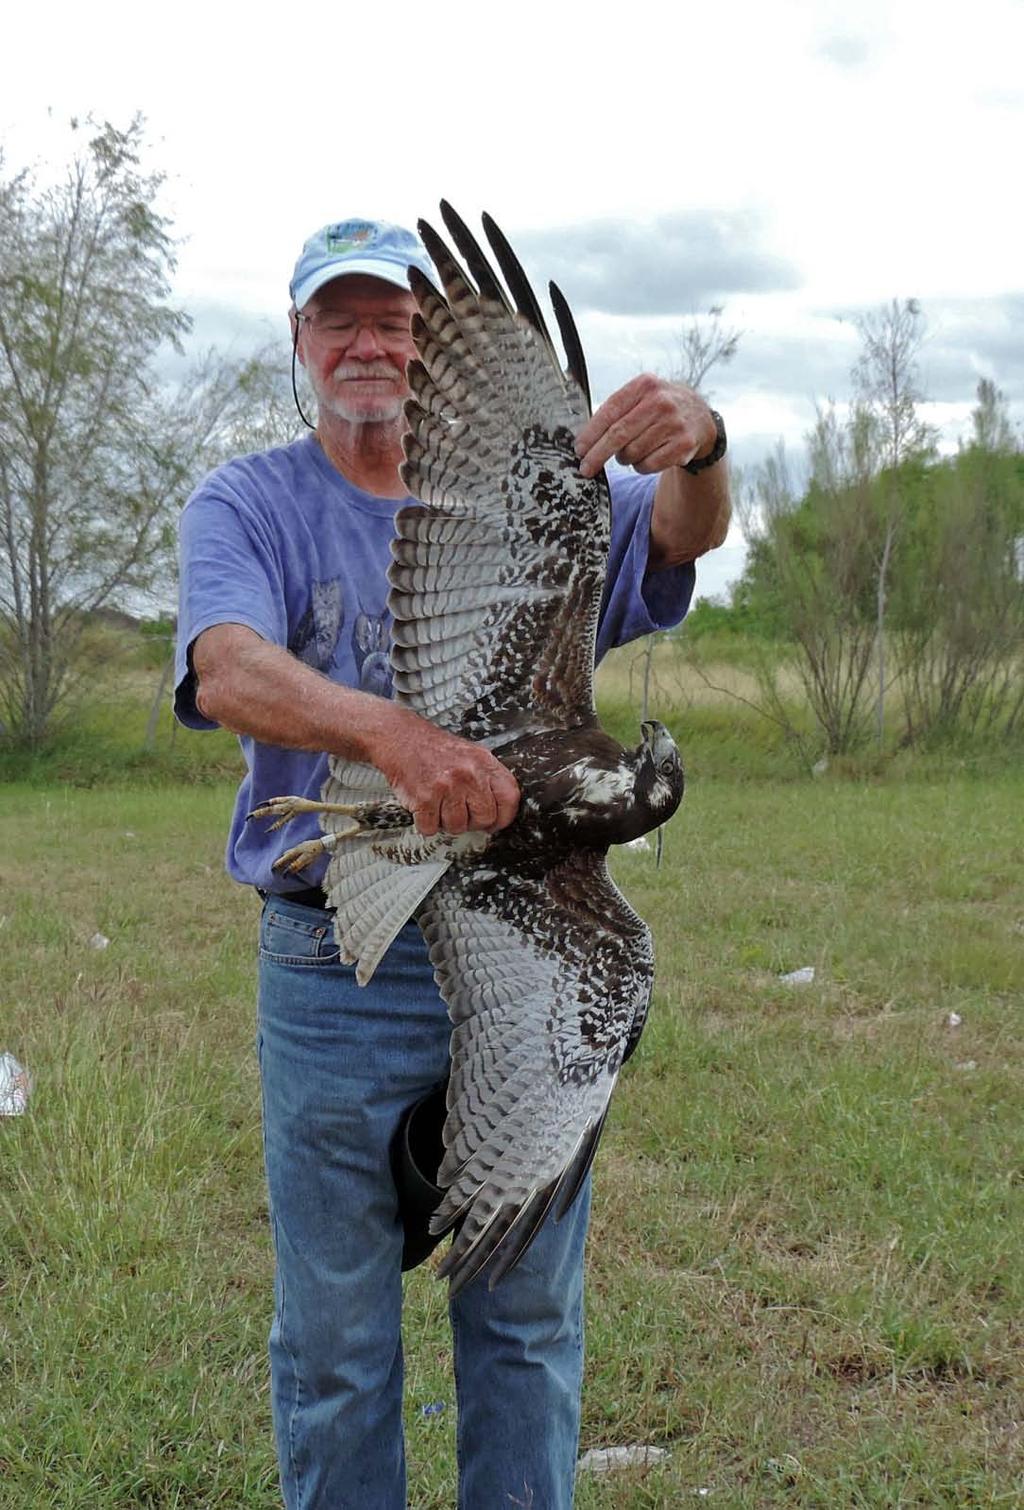 Bill Clark is authorized by the Federal Government to trap and band Raptors. He had traps containing live mice or sparrows set up.